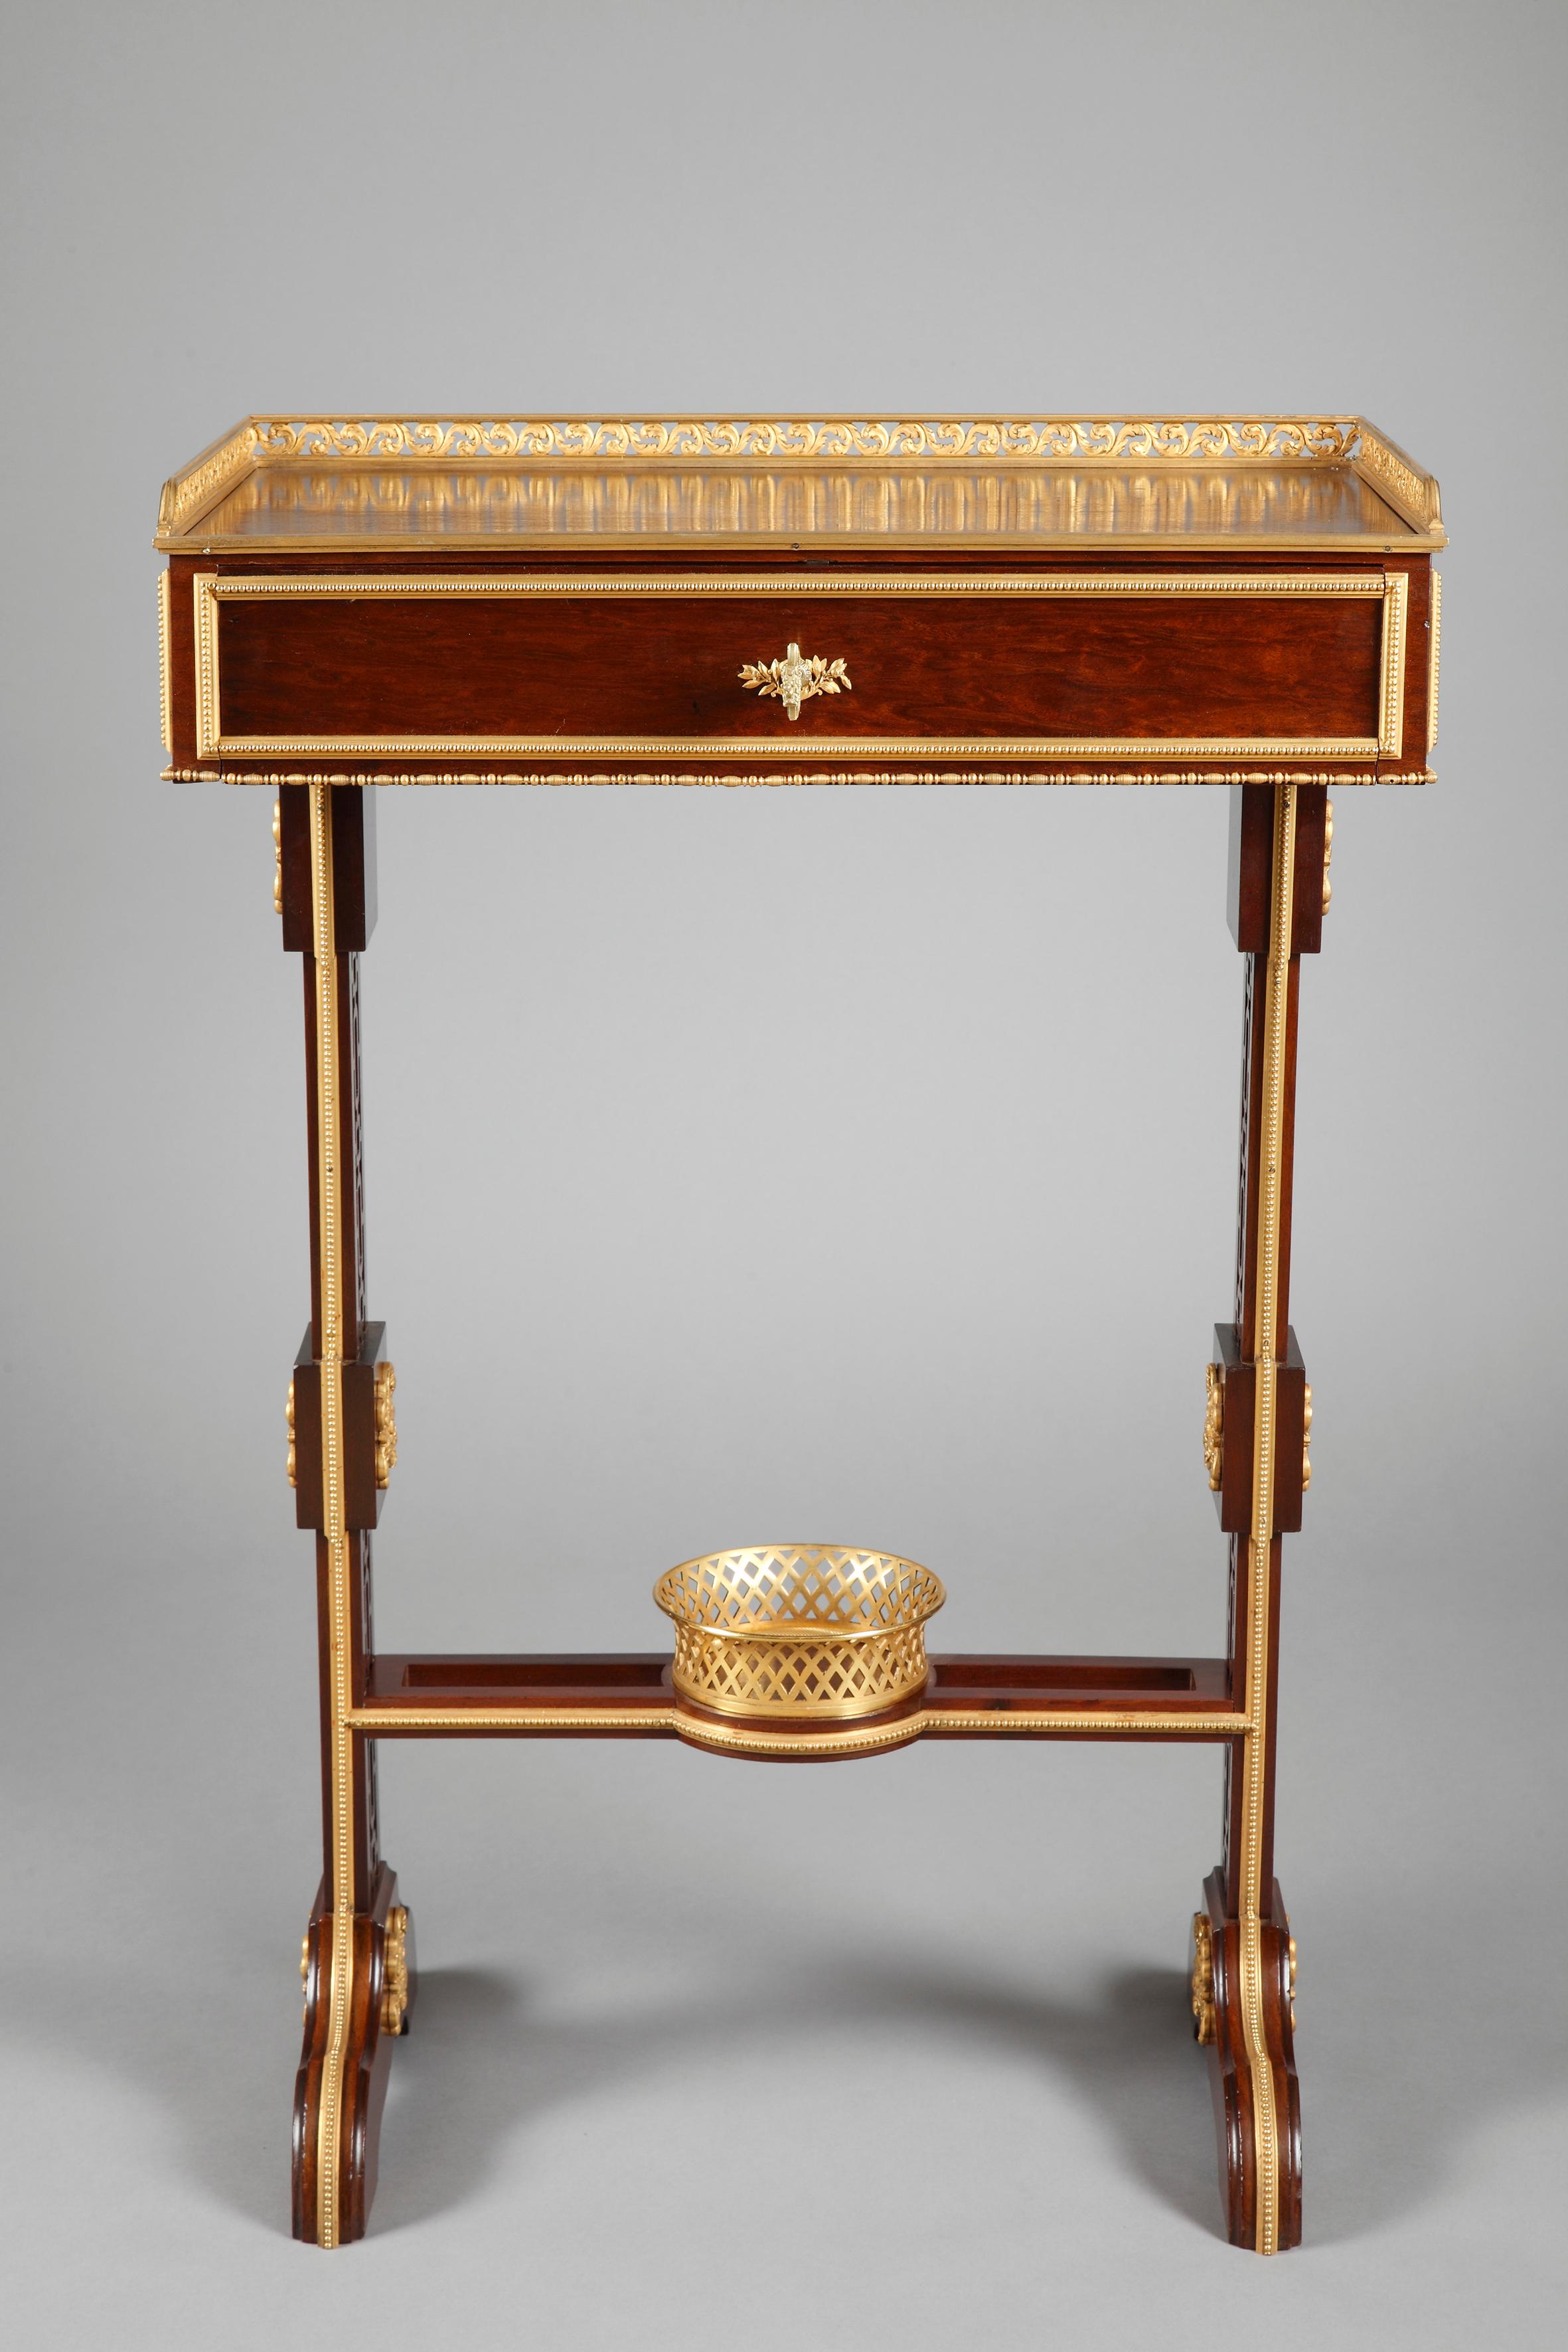 Beautiful Louis XVI style wooden writing table. The rectangular top, surrounded on three sides by a fine pierced and gilt-bronze frieze, above a drawer whose front forms a flap opening by a clever mechanism, revealing an elegant brown leathered